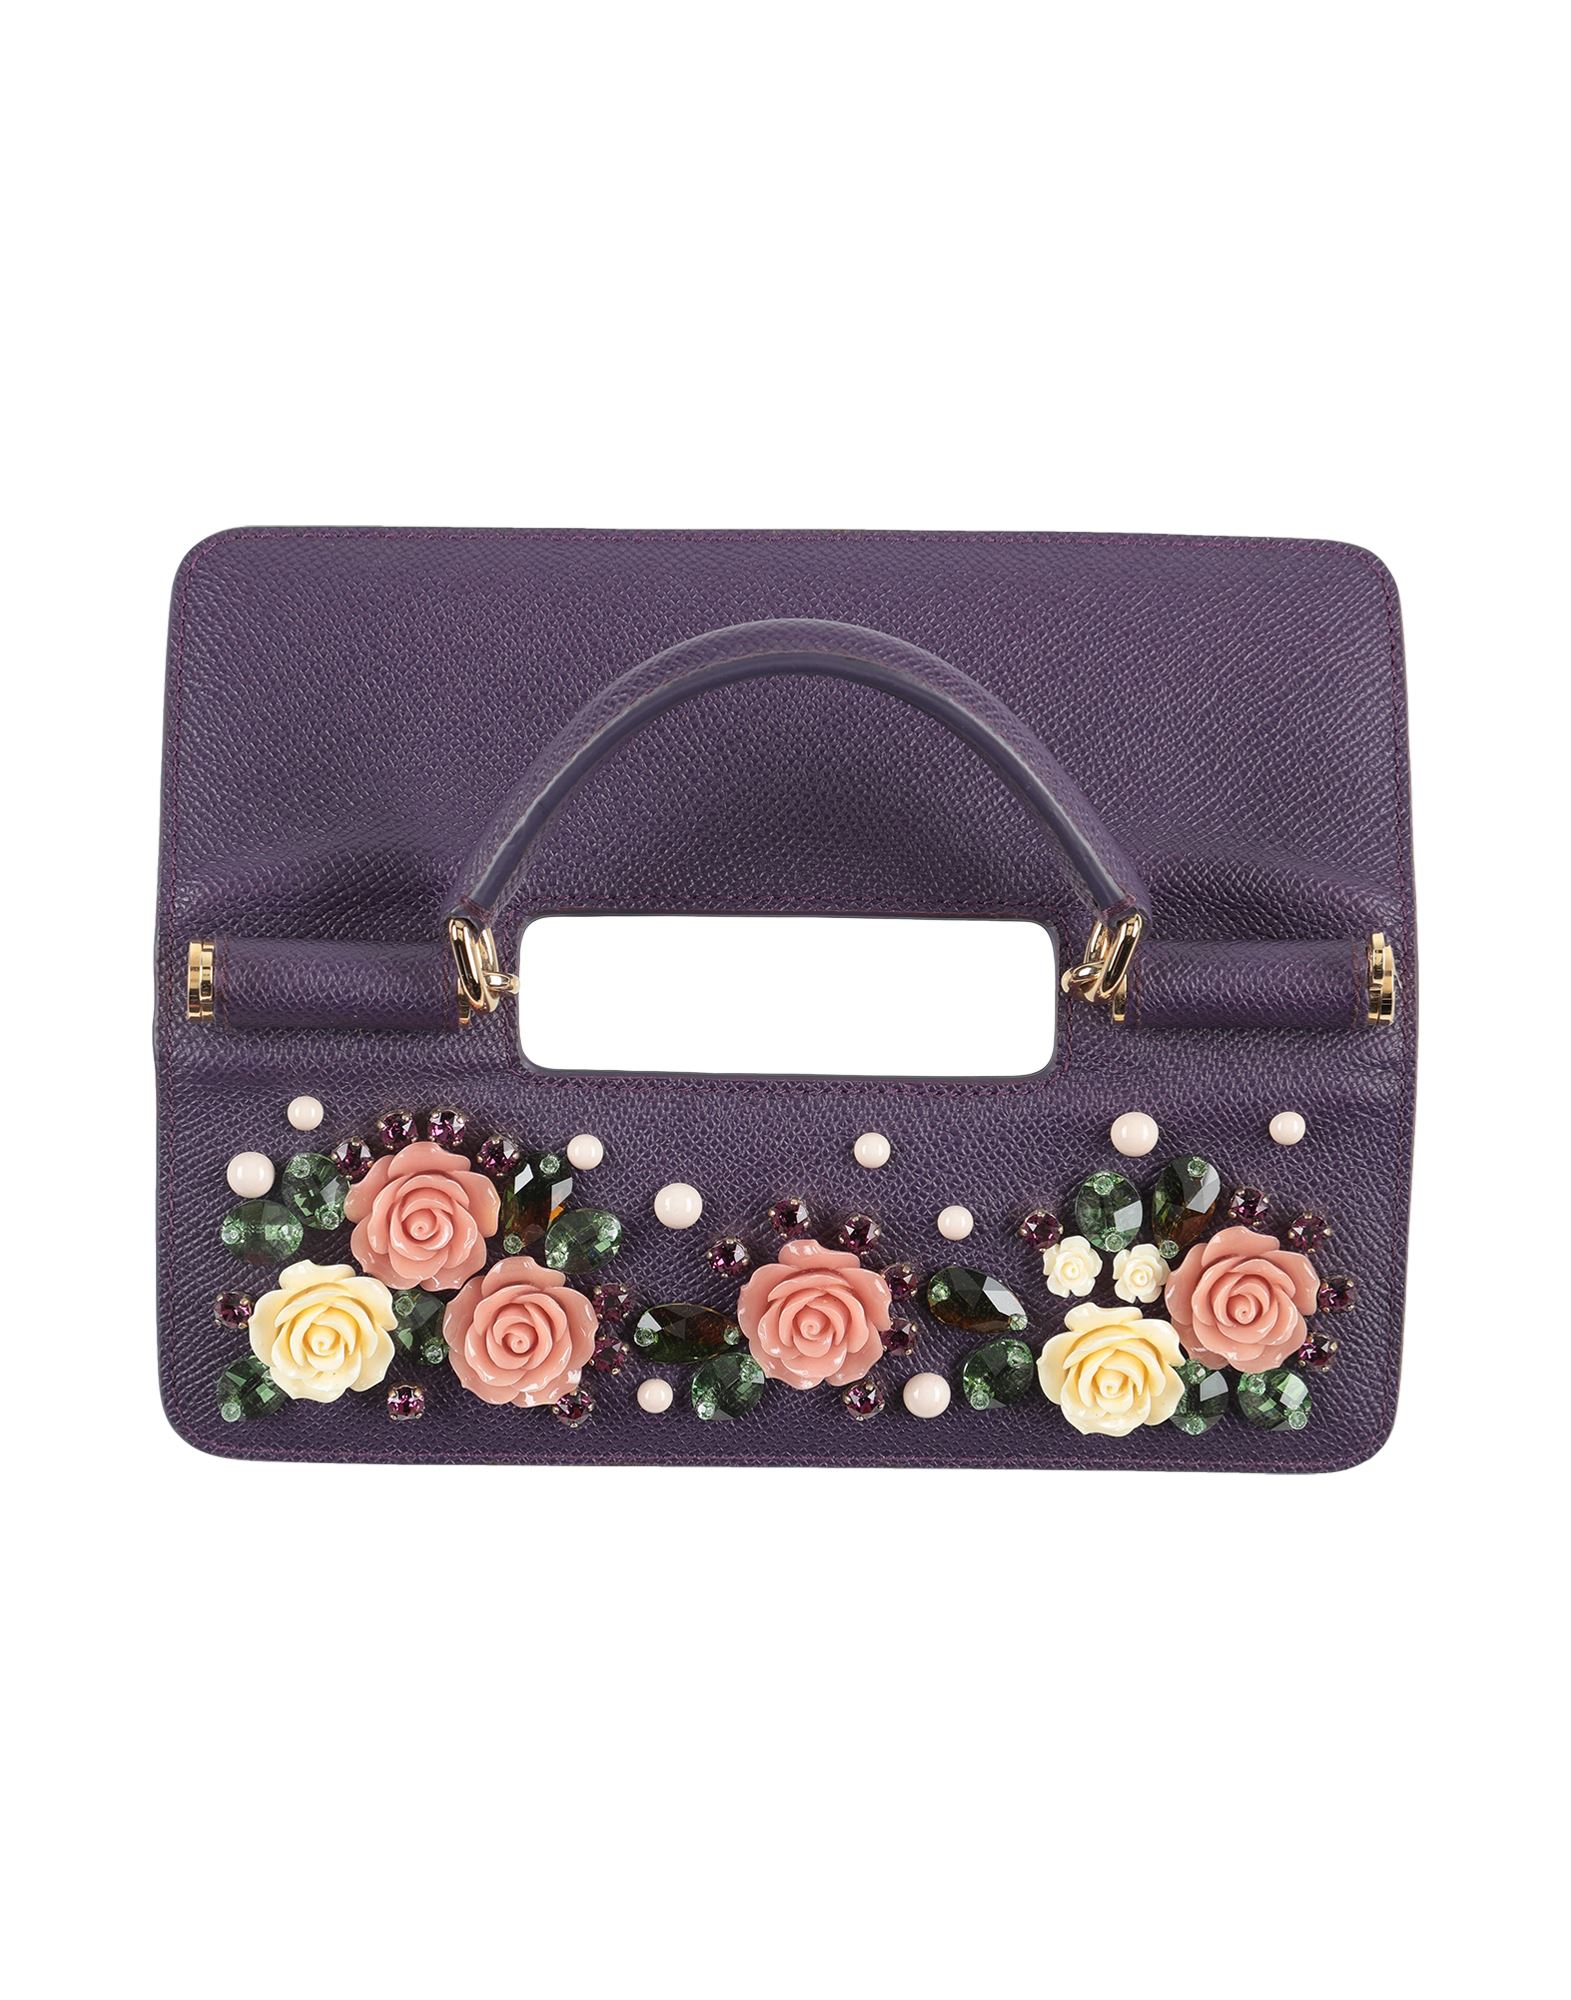 Dolce & Gabbana Bag Accessories & Charms In Purple